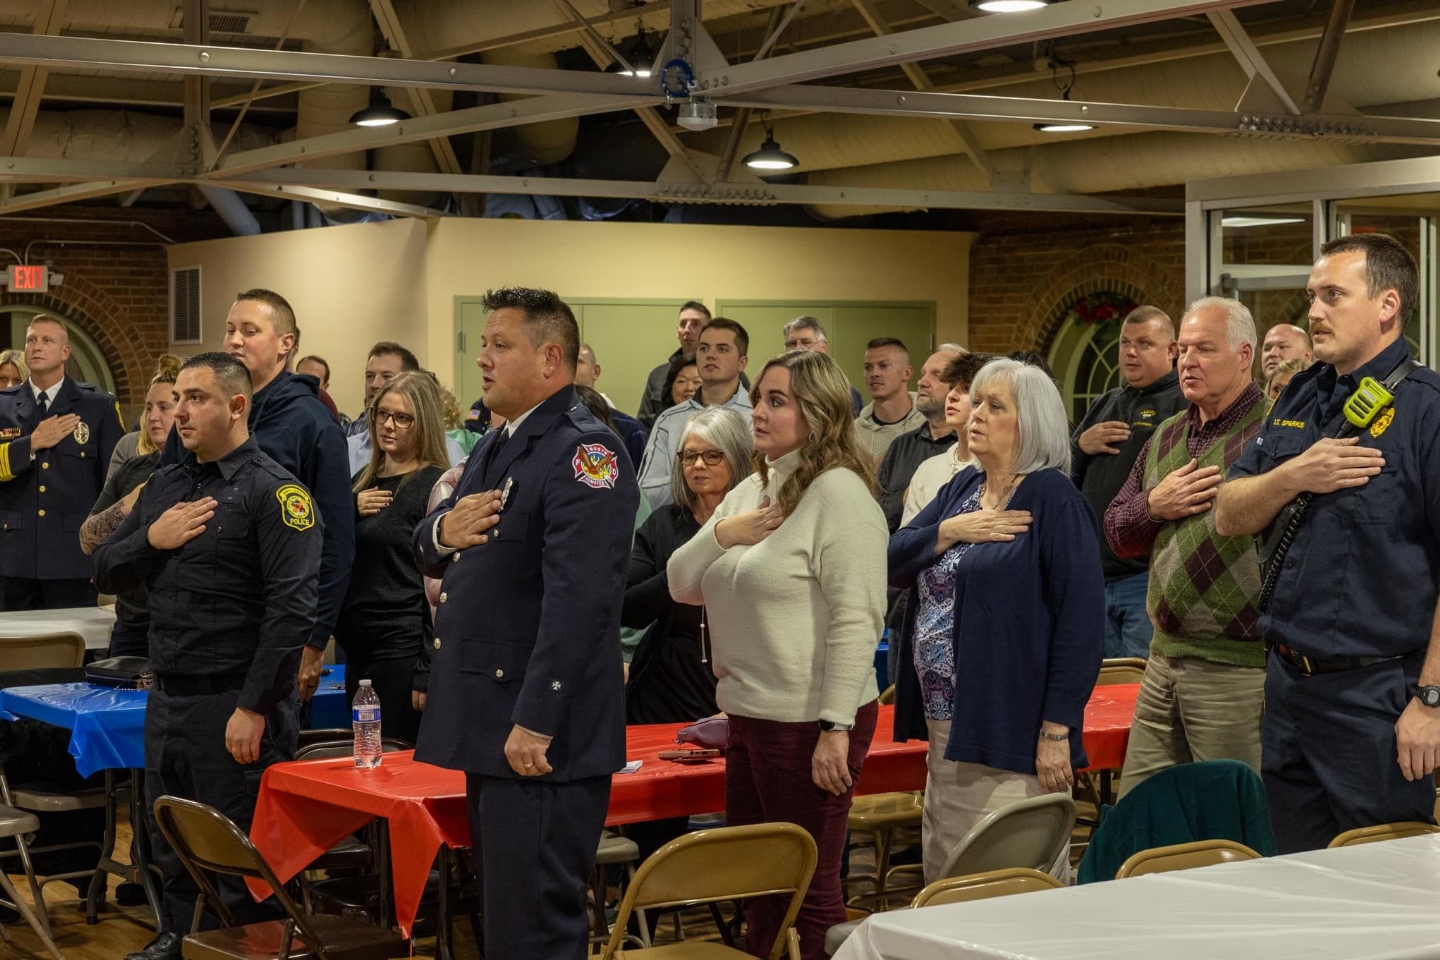 Congratulations to the recipients of the award, 
Police Officer Mark Petro
Firefighter Mike Fusco
We want to extend our heartfelt gratitude to everyone who joined us last night to celebrate and honor the dedication and bravery of our local heroes. 
Special thanks to our incredible officers for their unwavering commitment to keeping our community safe.